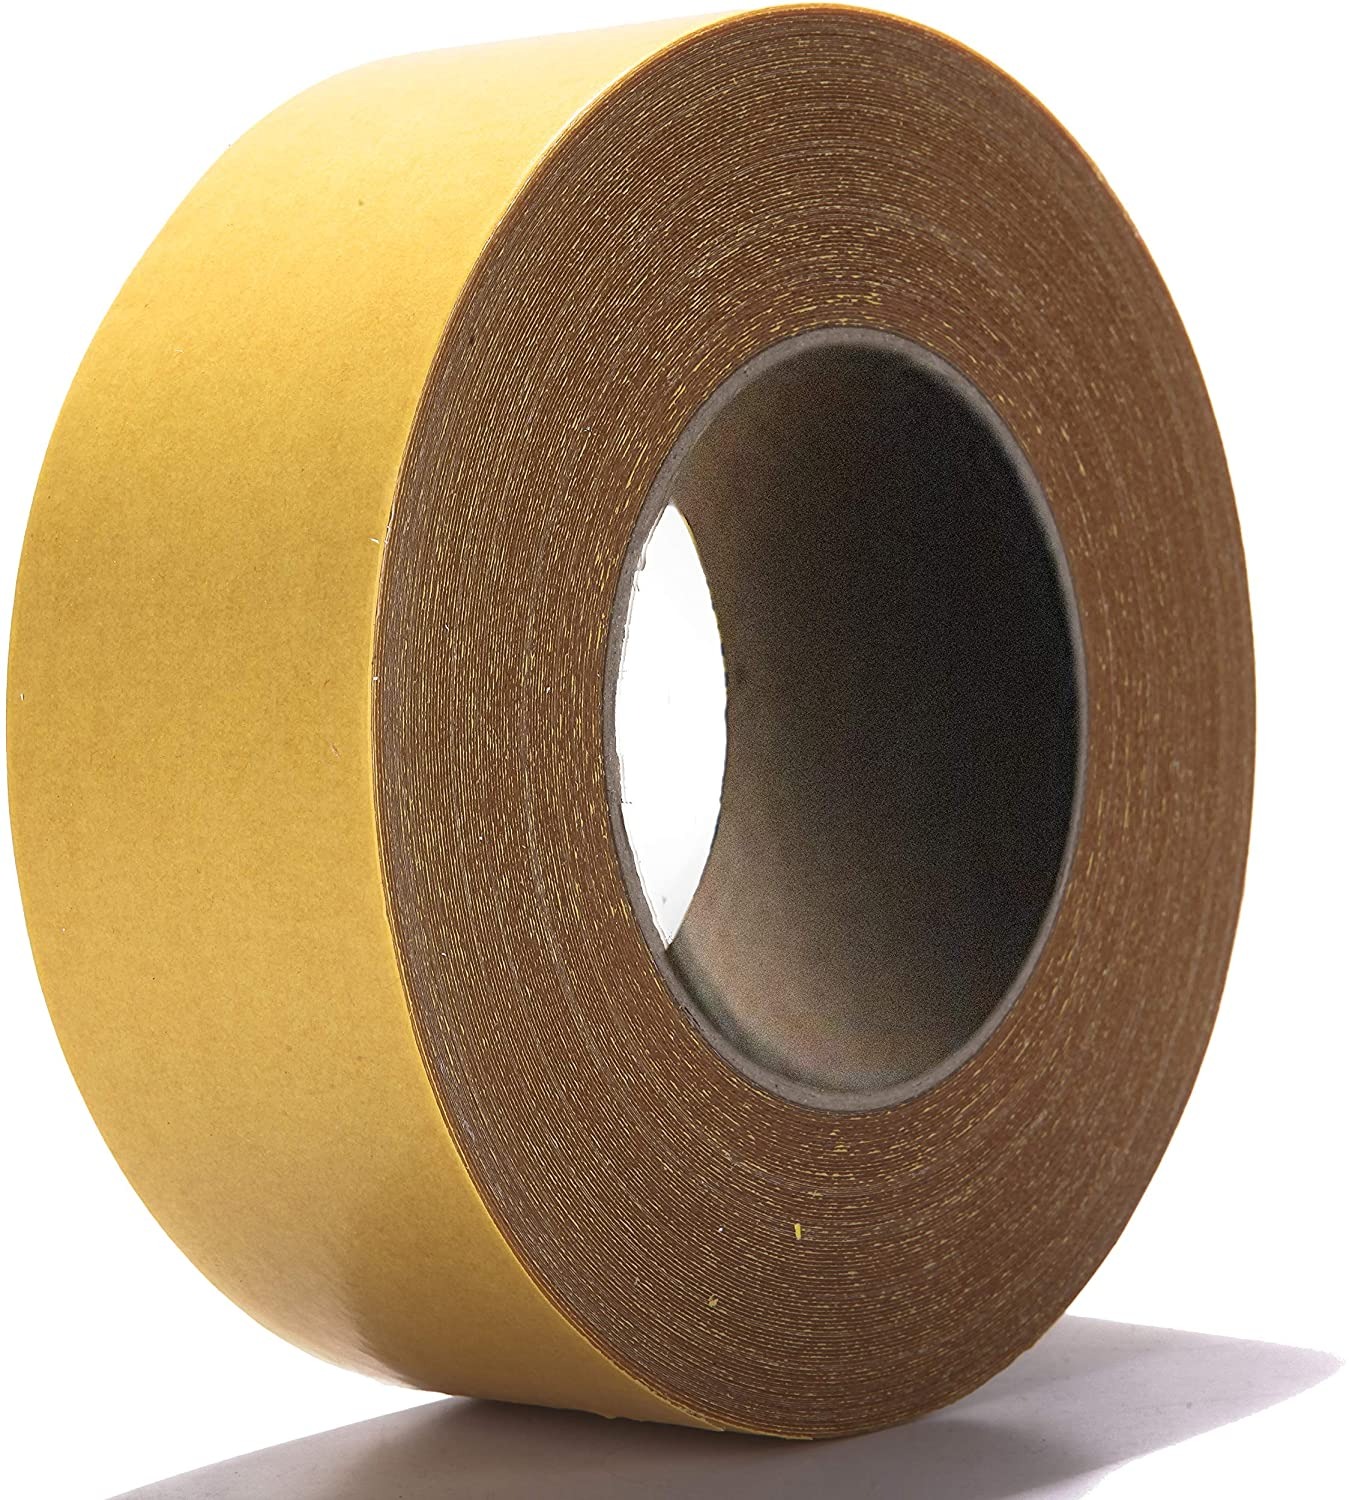 mothers day presale 48 off waterproof doublesided carpet tape10mbuy 2 get 1 free now8glgk